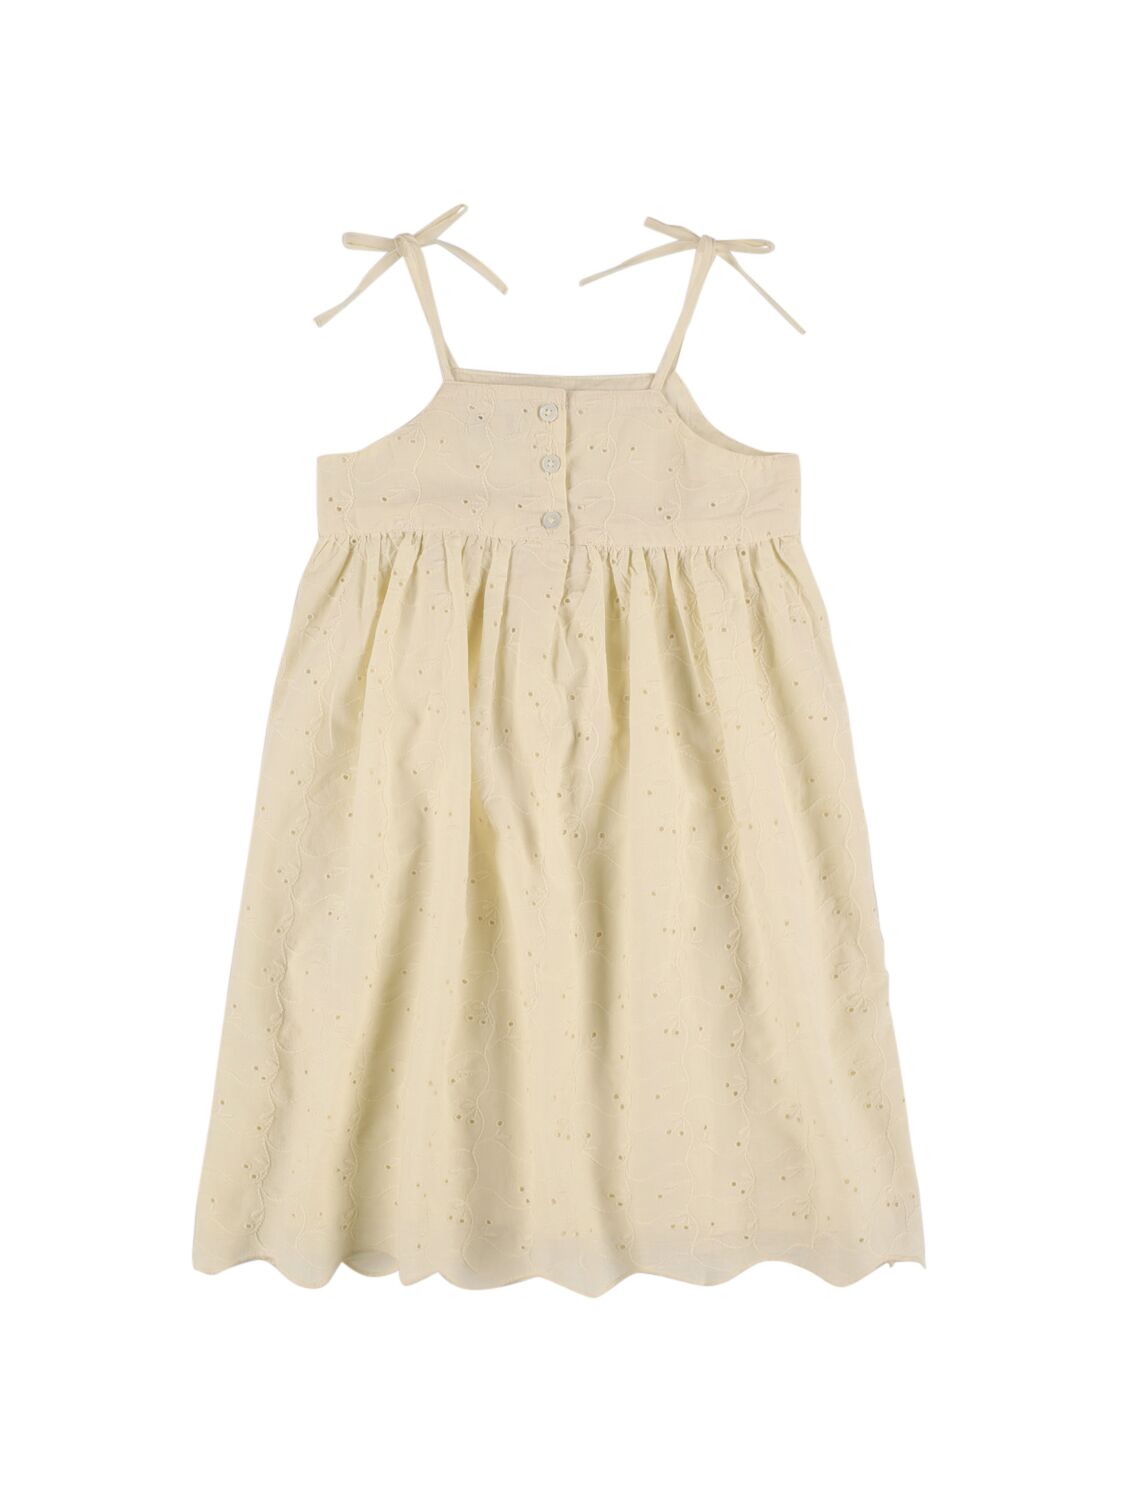 Liewood Kids' Broderie Anglaise Organic Cotton Dress In Off White